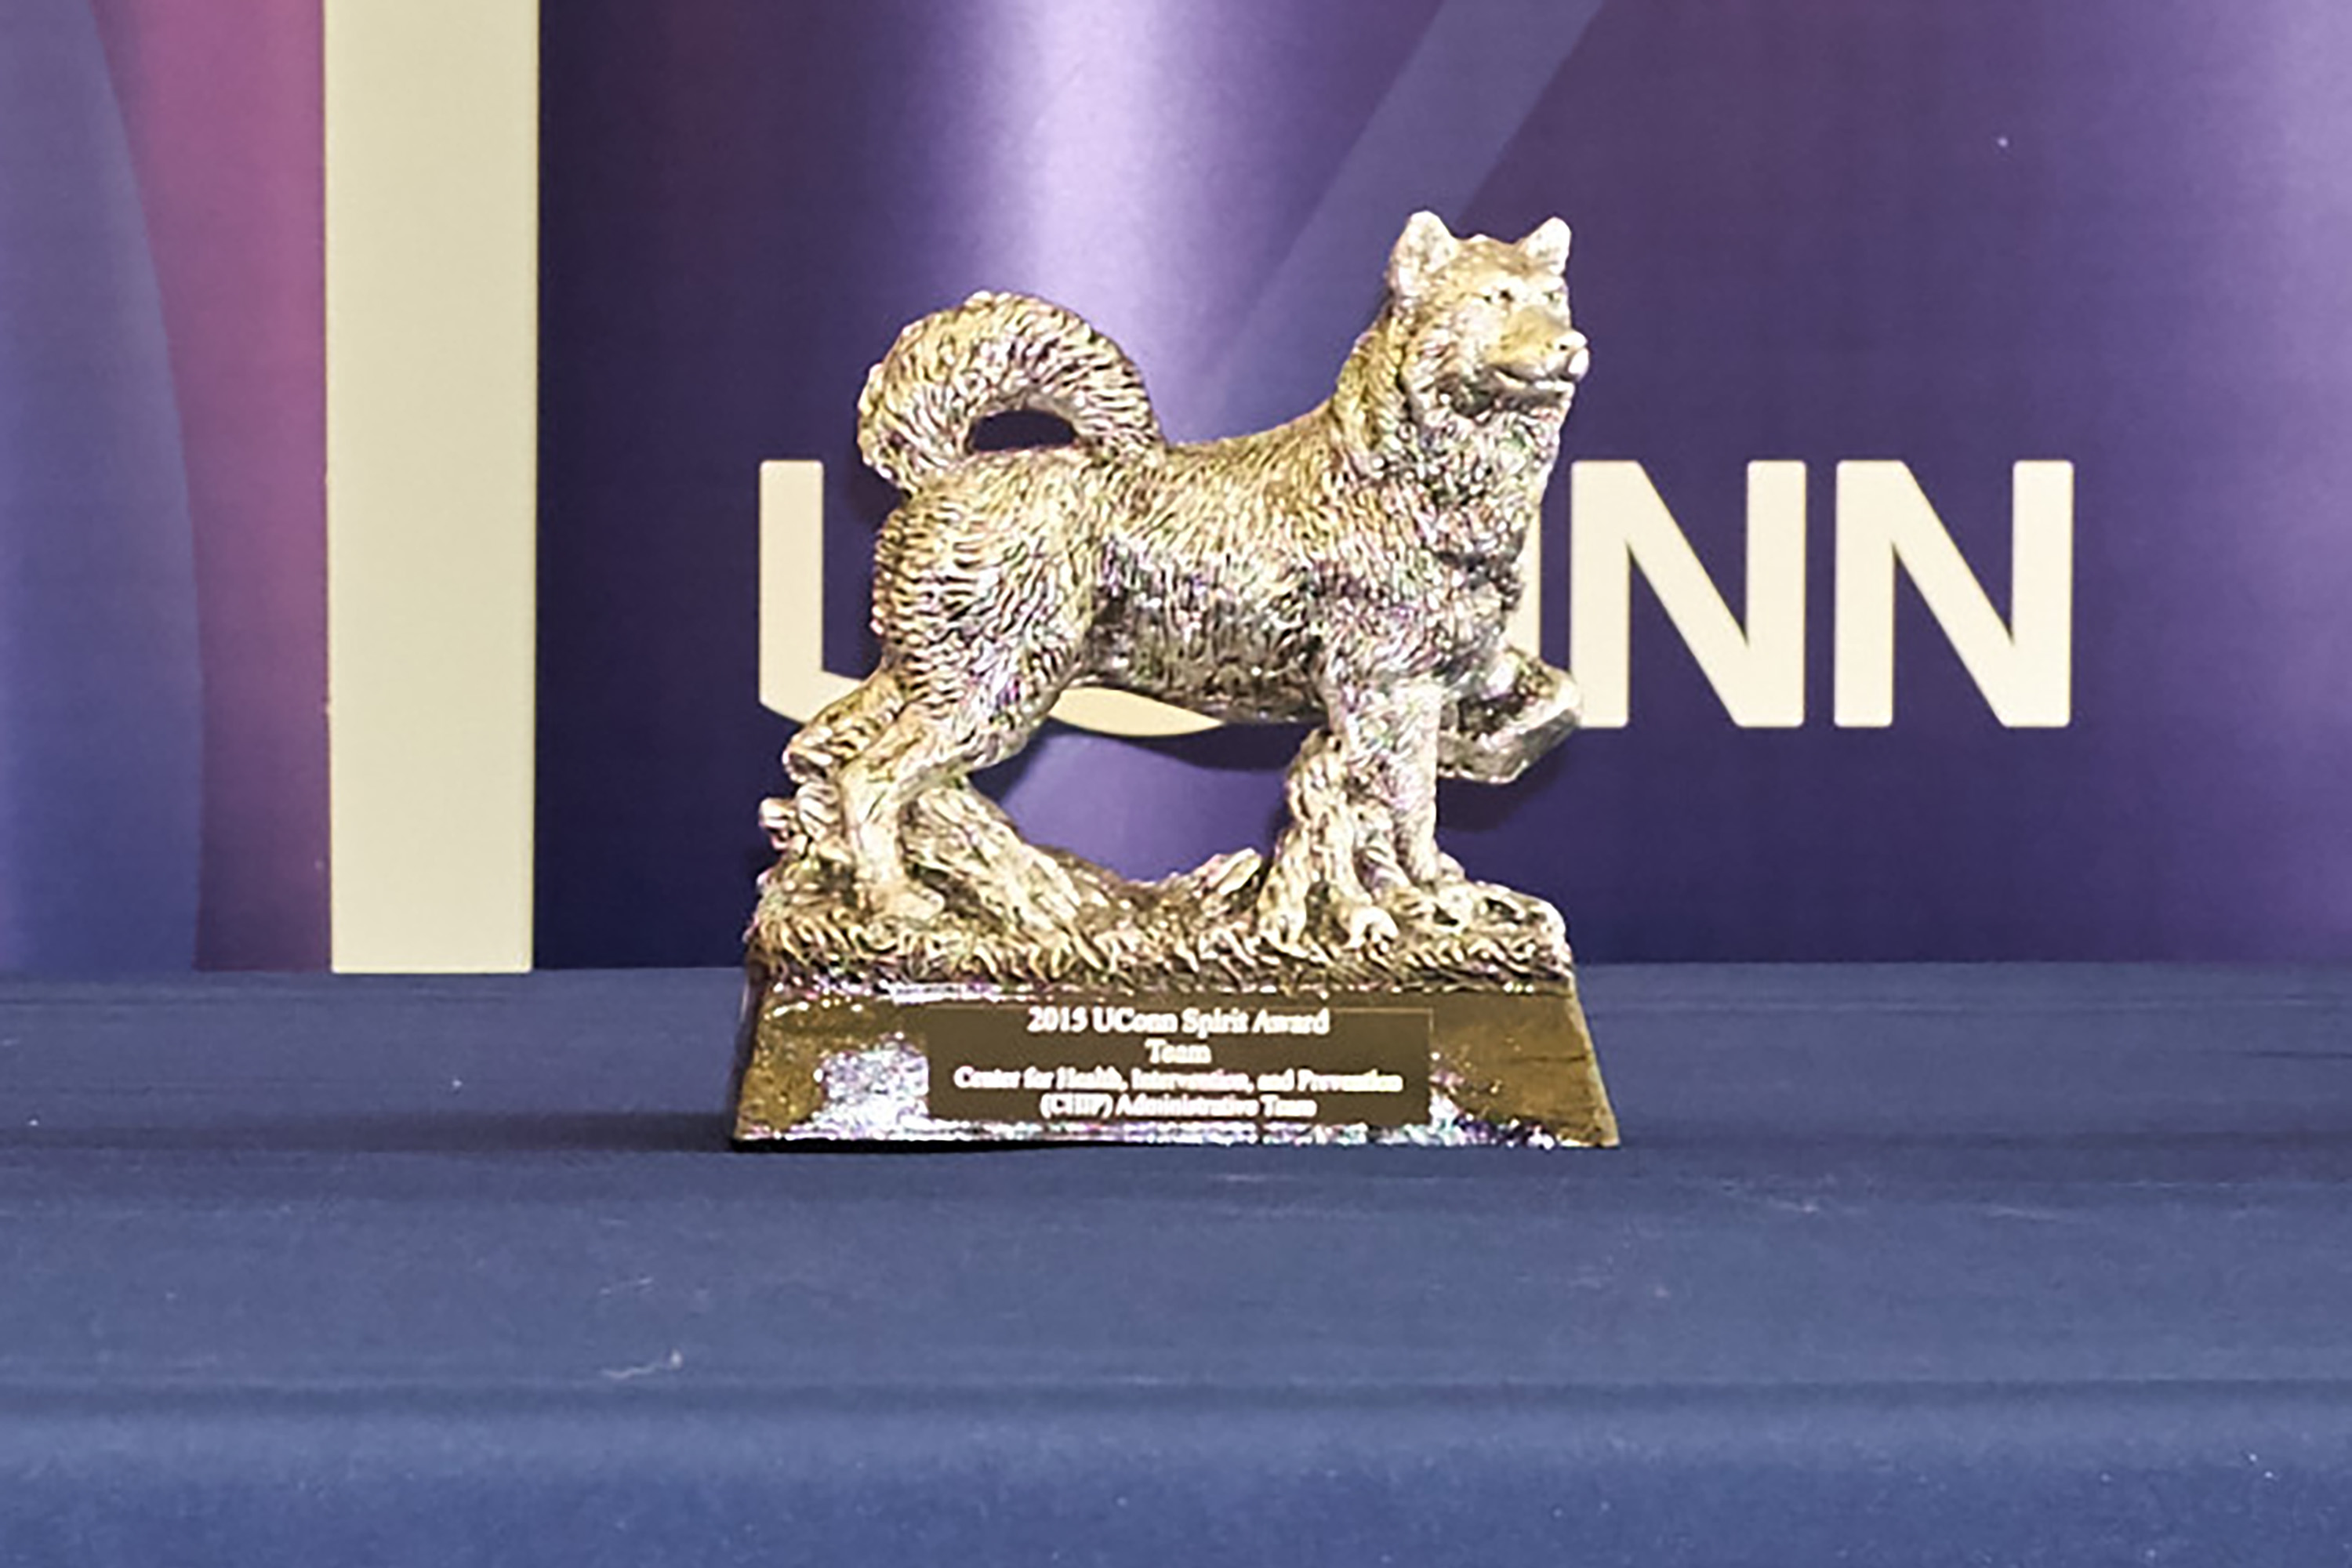 An example of a UConn Spirit Award, a replica of the Husky dog, from 2015. (Peter Morenus/UConn Photo)